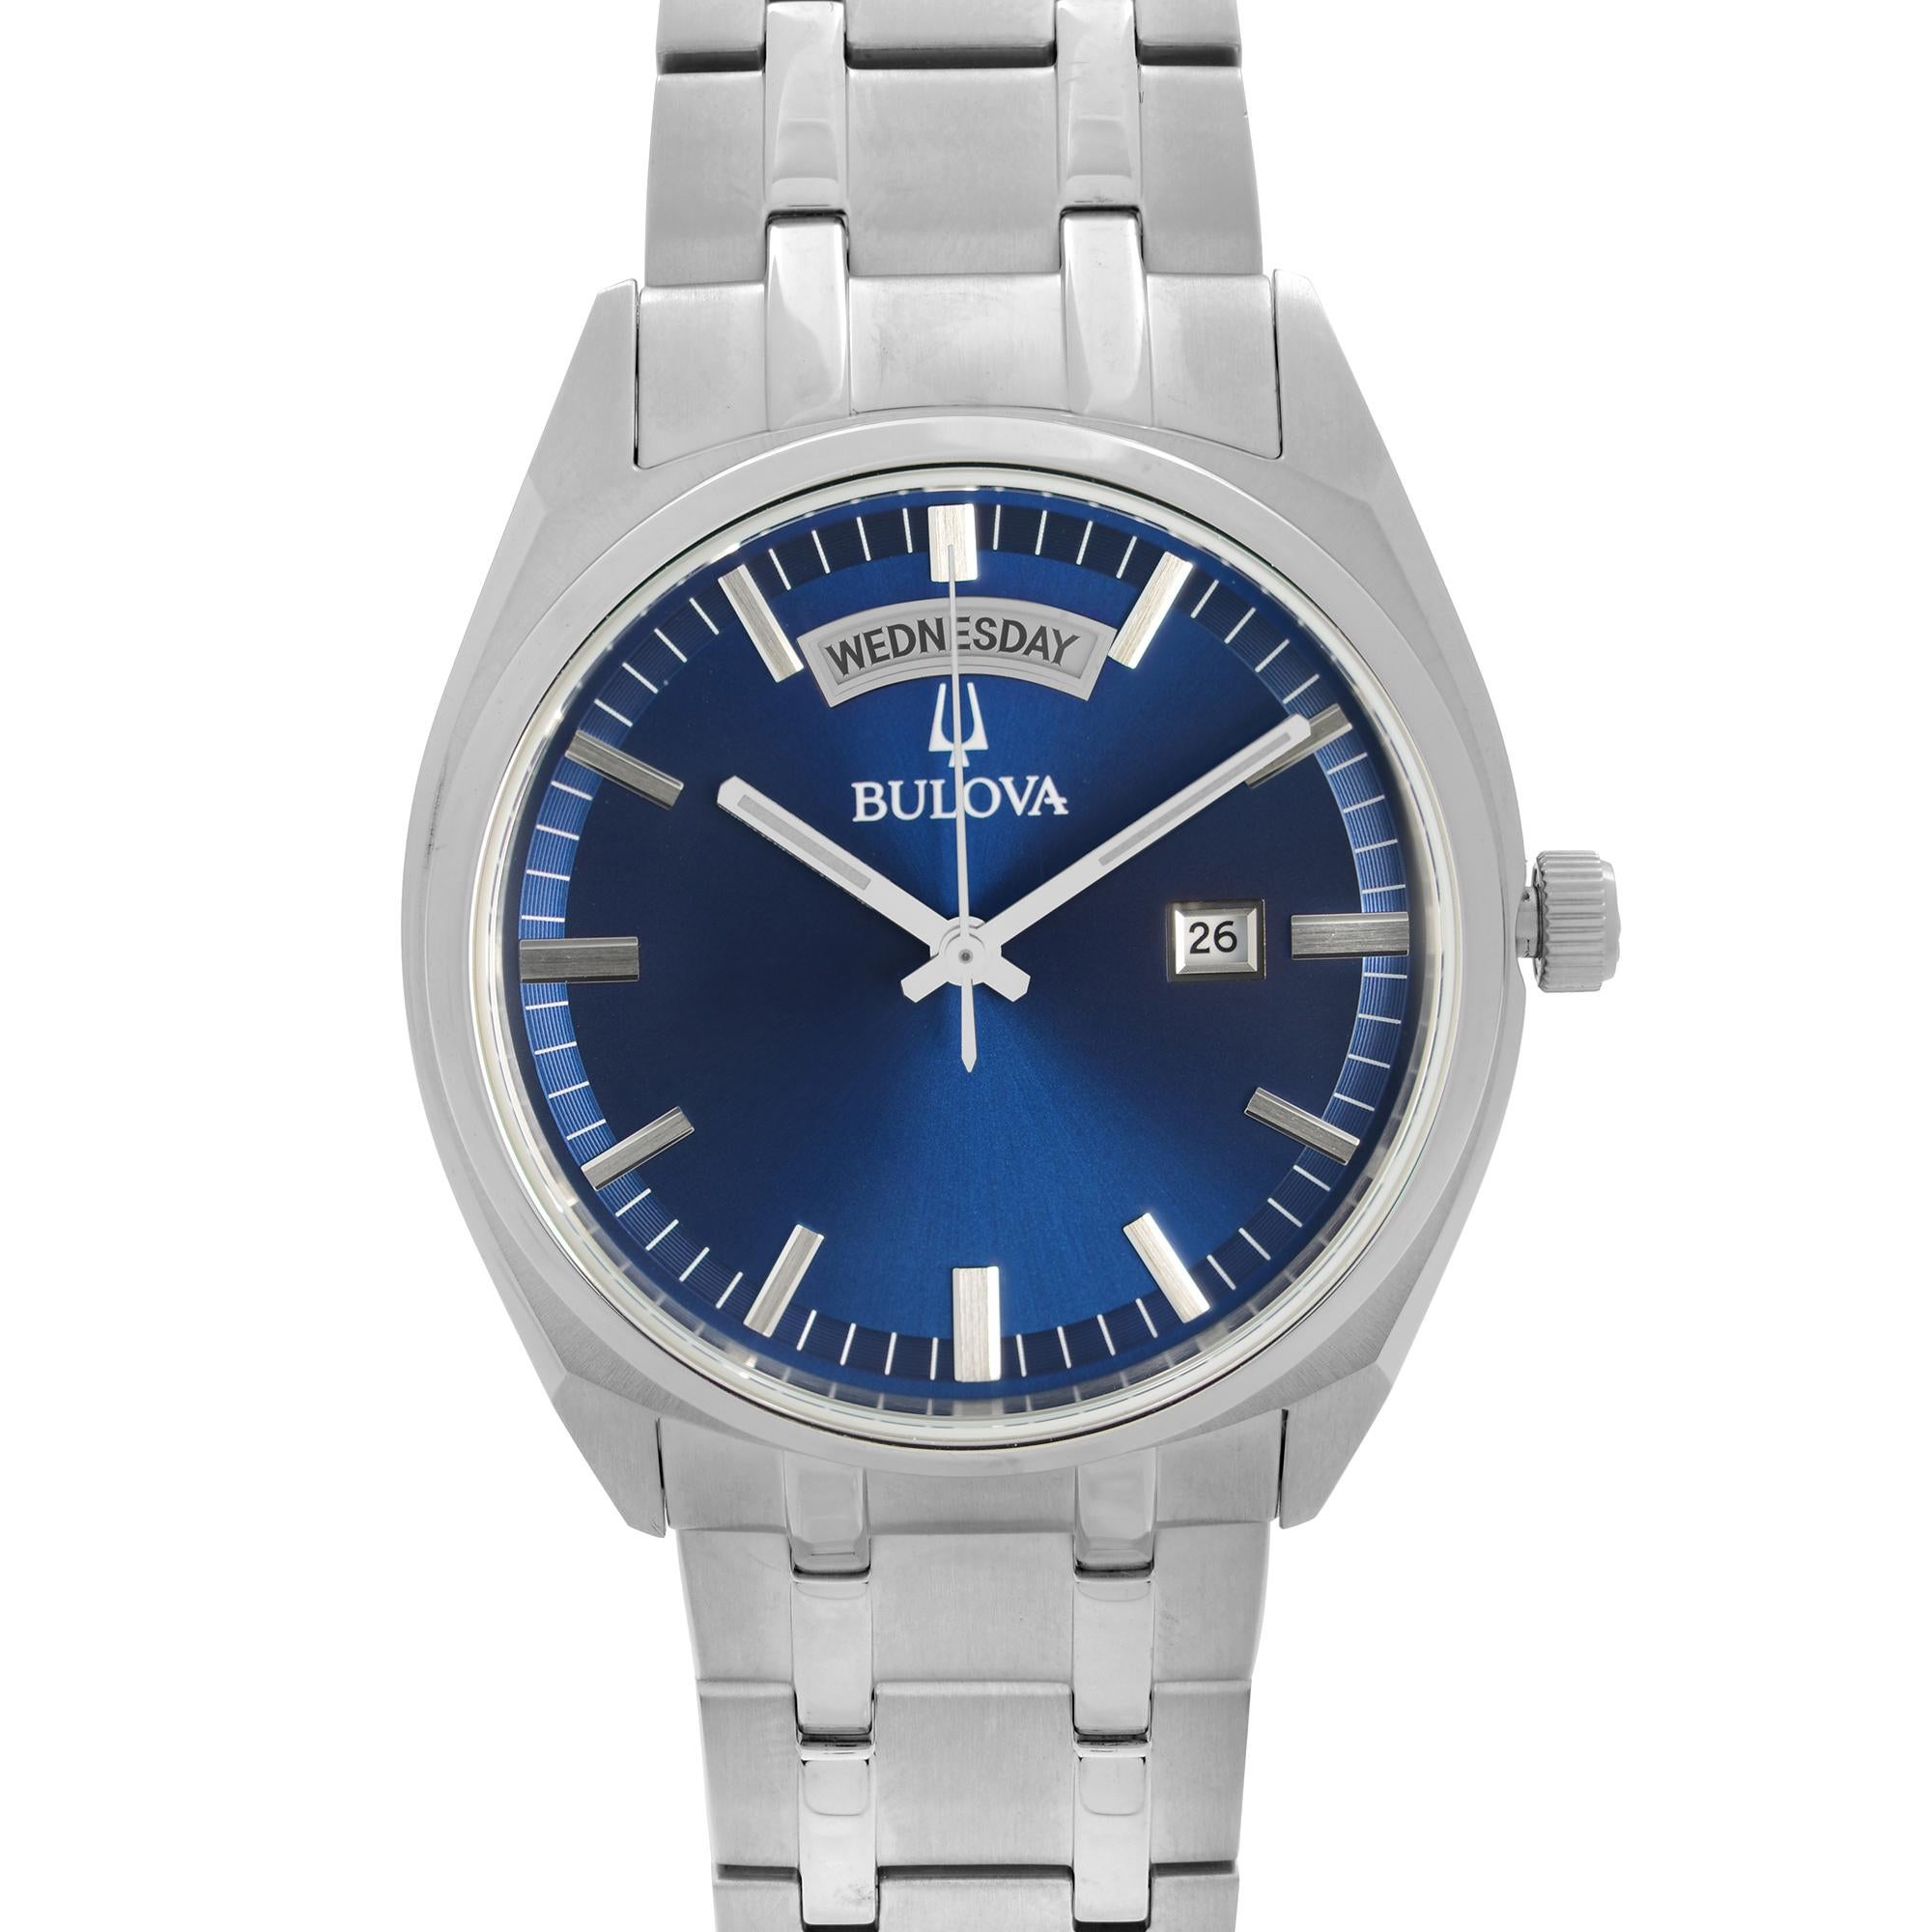 Unworn Bulova Classic Day-Date Stainless Steel Blue Dial Quartz Mens Watch 96C125. This Beautiful Timepiece Features: Stainless Steel Case and Bracelet. Blue Dial with Luminous Silver-Tone Hands and Index Hour Markers. Day and Date Displayed at 12